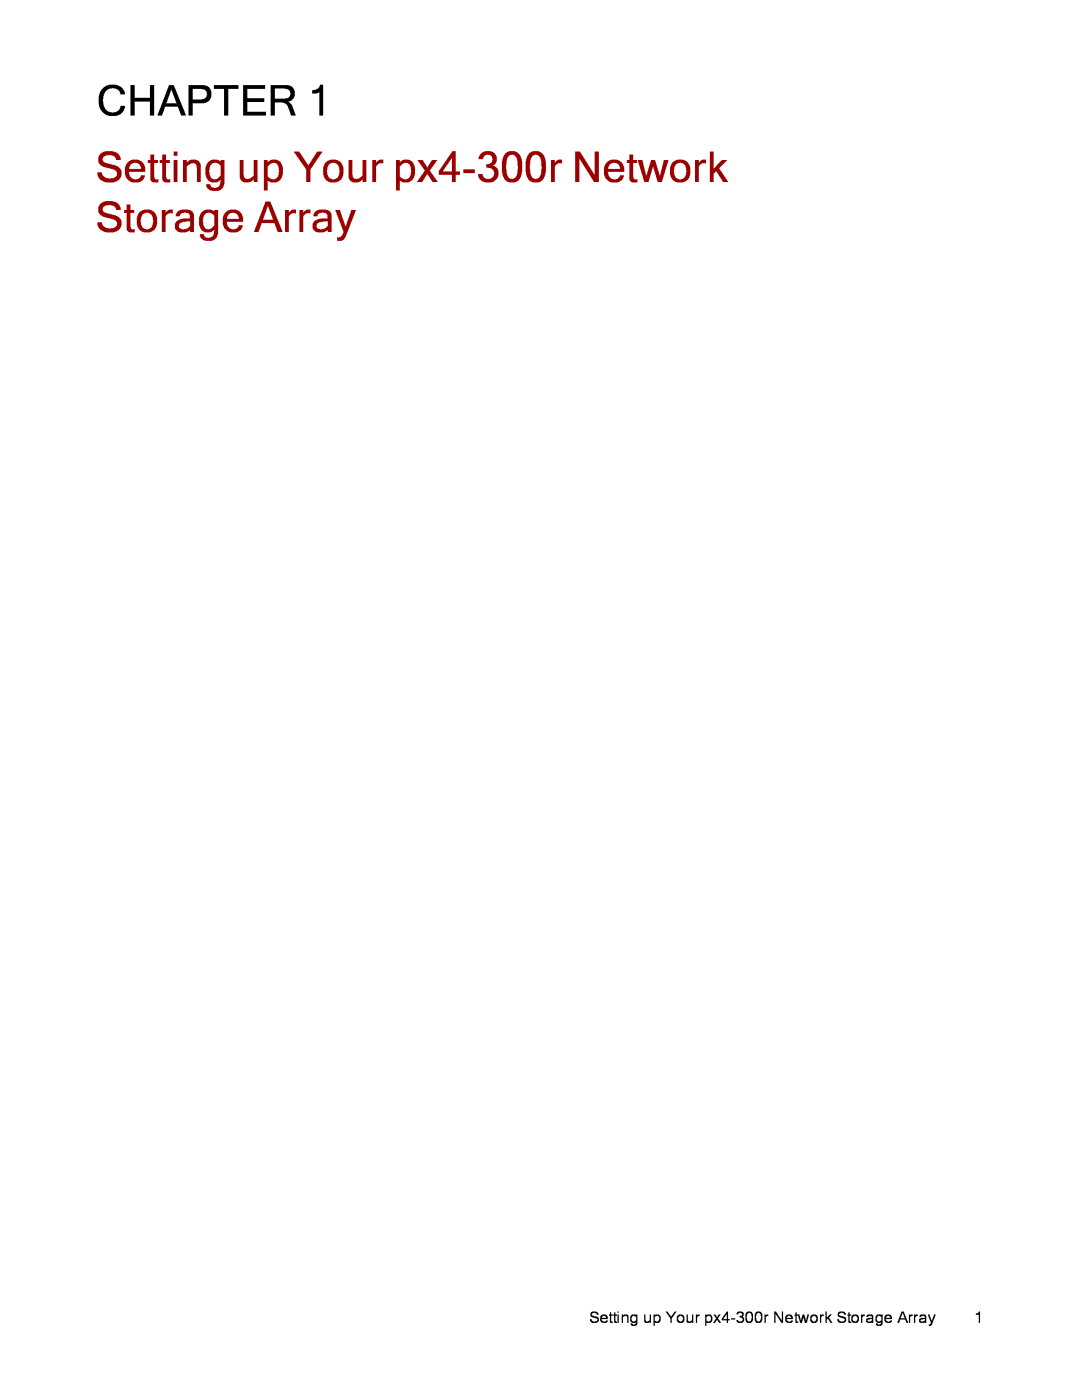 Lenovo 70BJ9005WW, 70BJ9007WW manual Chapter, Setting up Your px4-300rNetwork Storage Array 